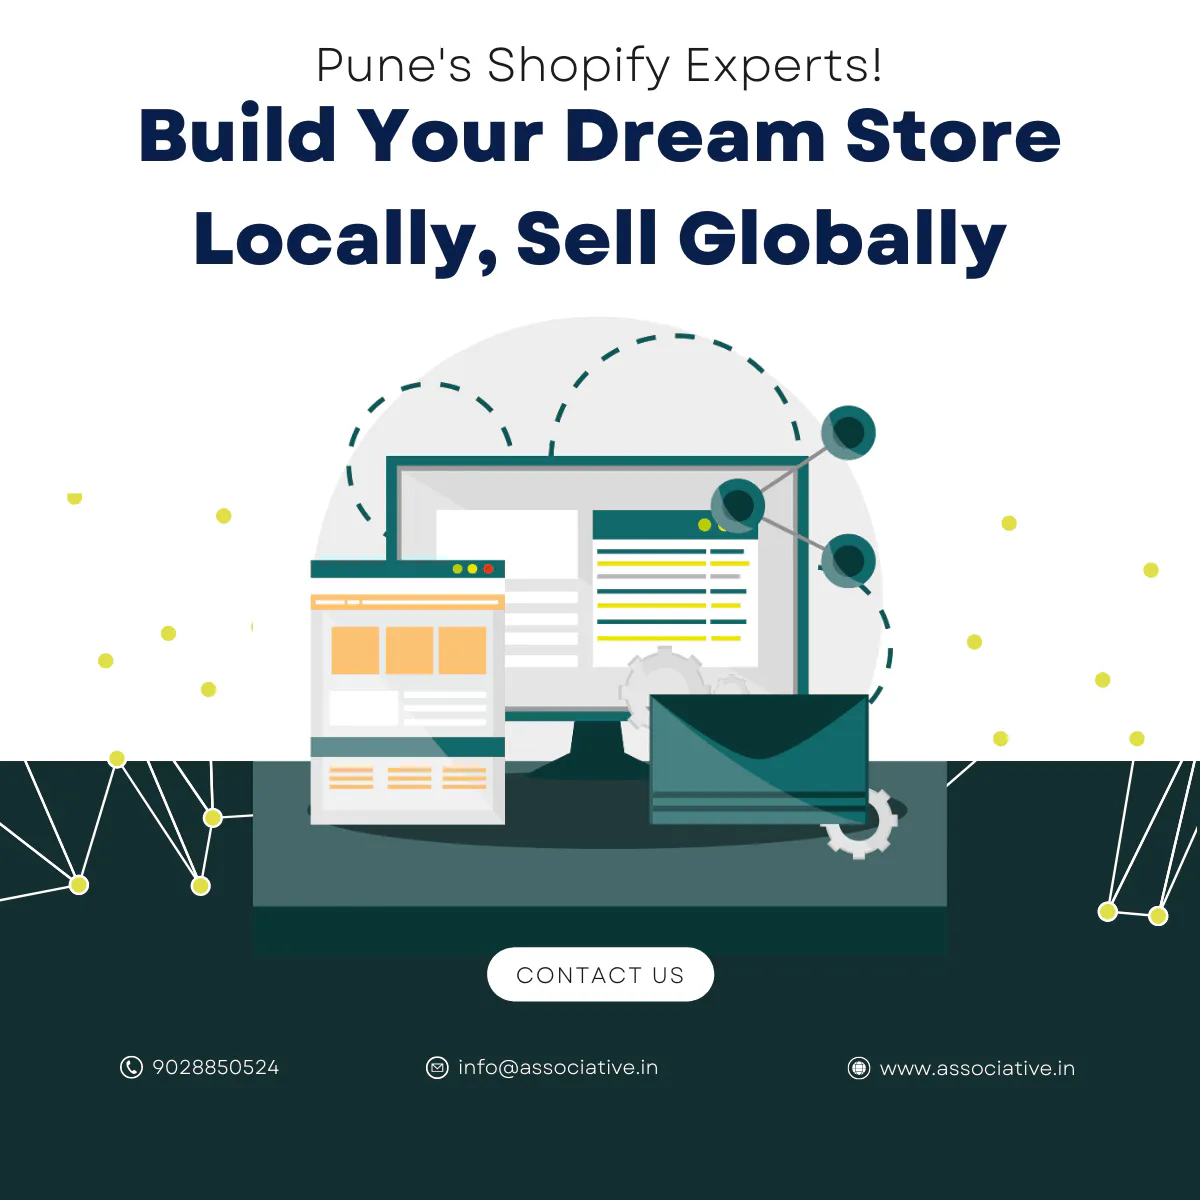 Pune's Shopify Experts! Build Your Dream Store Locally, Sell Globally